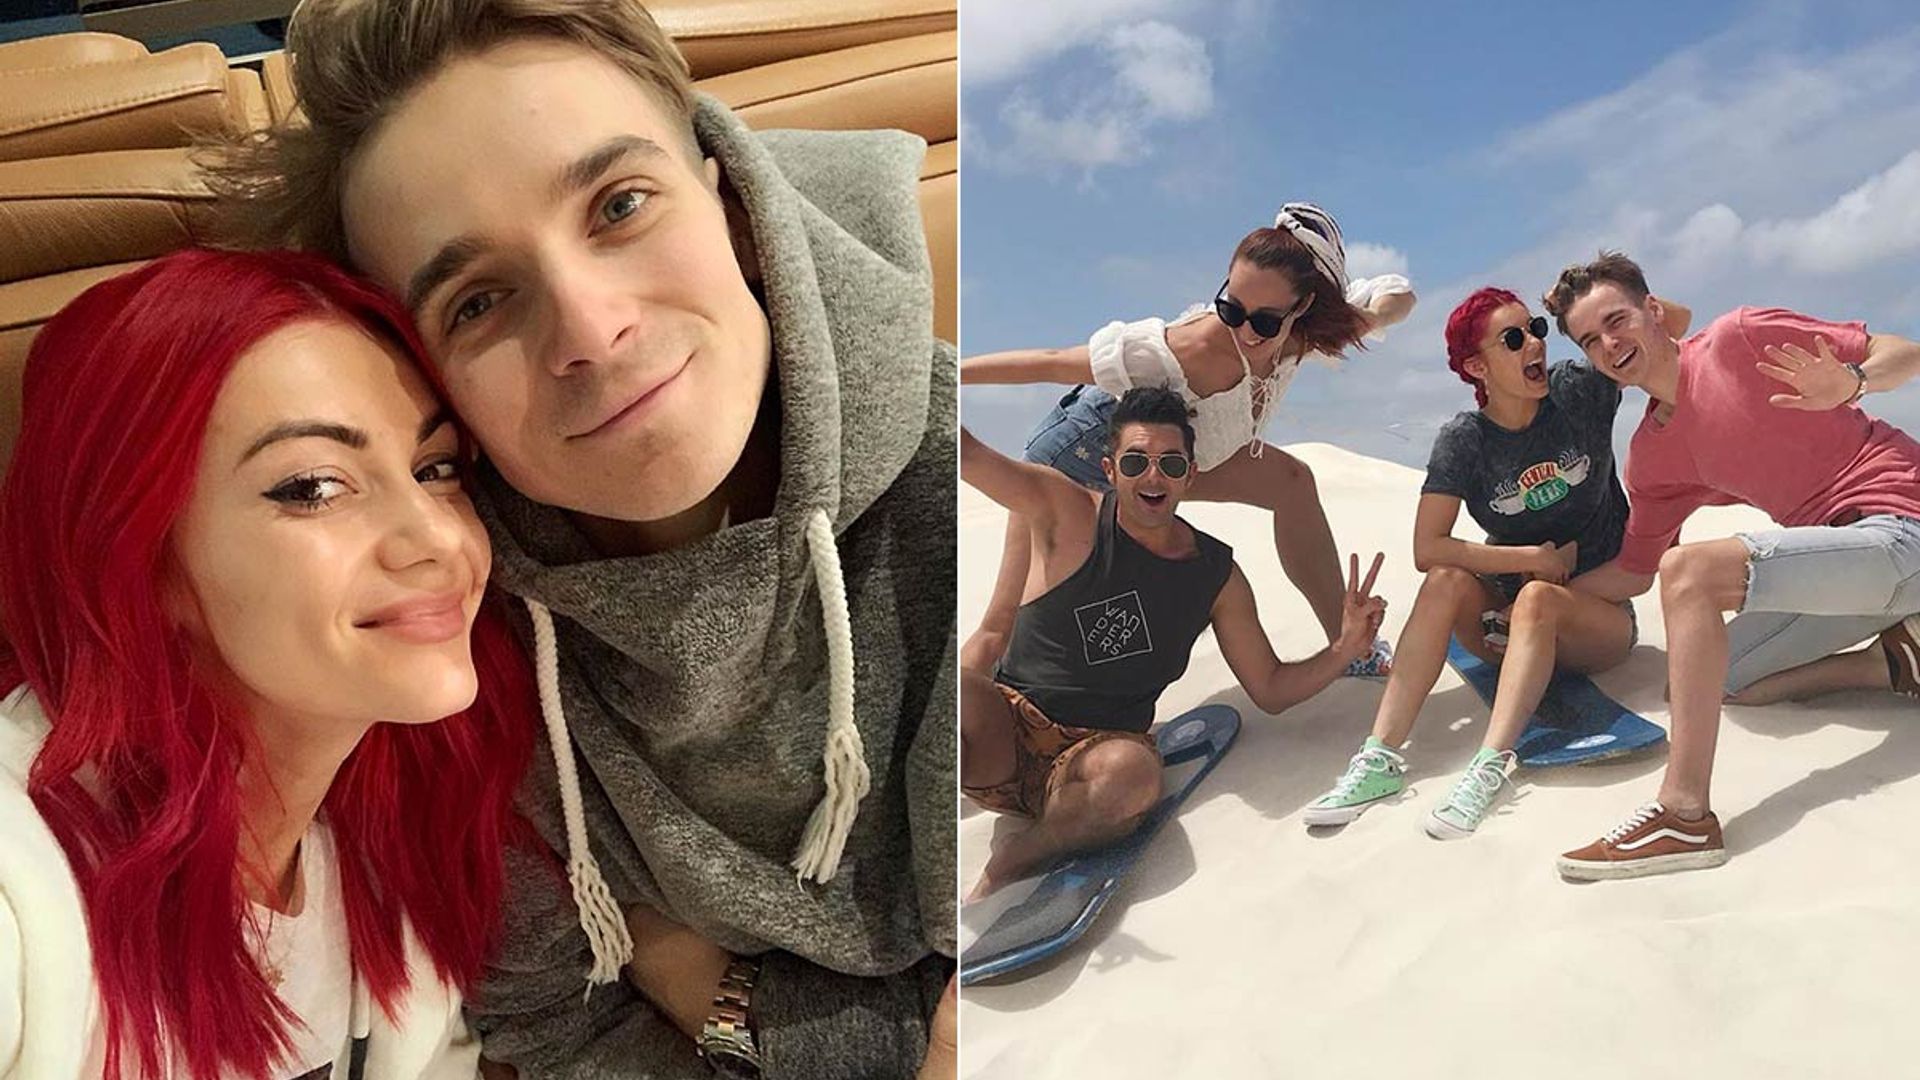 Dianne Buswell and Joe Sugg show their silly side as they visit Dianne's family in Australia